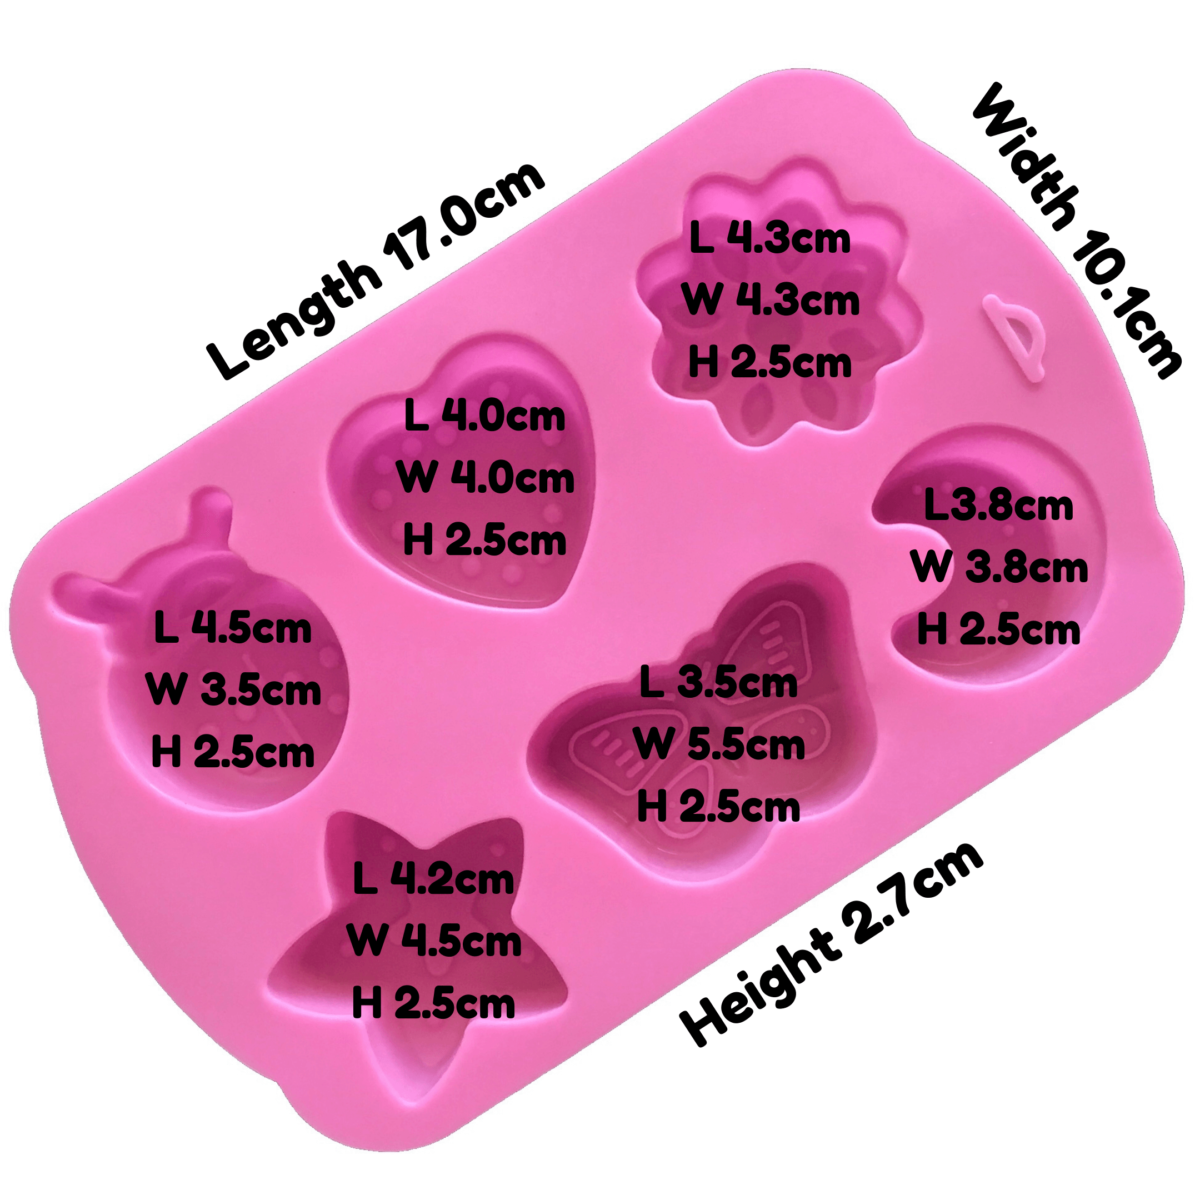 written dimensions of small pink silicone mould with six cavites - flower, heart, ladybug, moon, butterfly and star